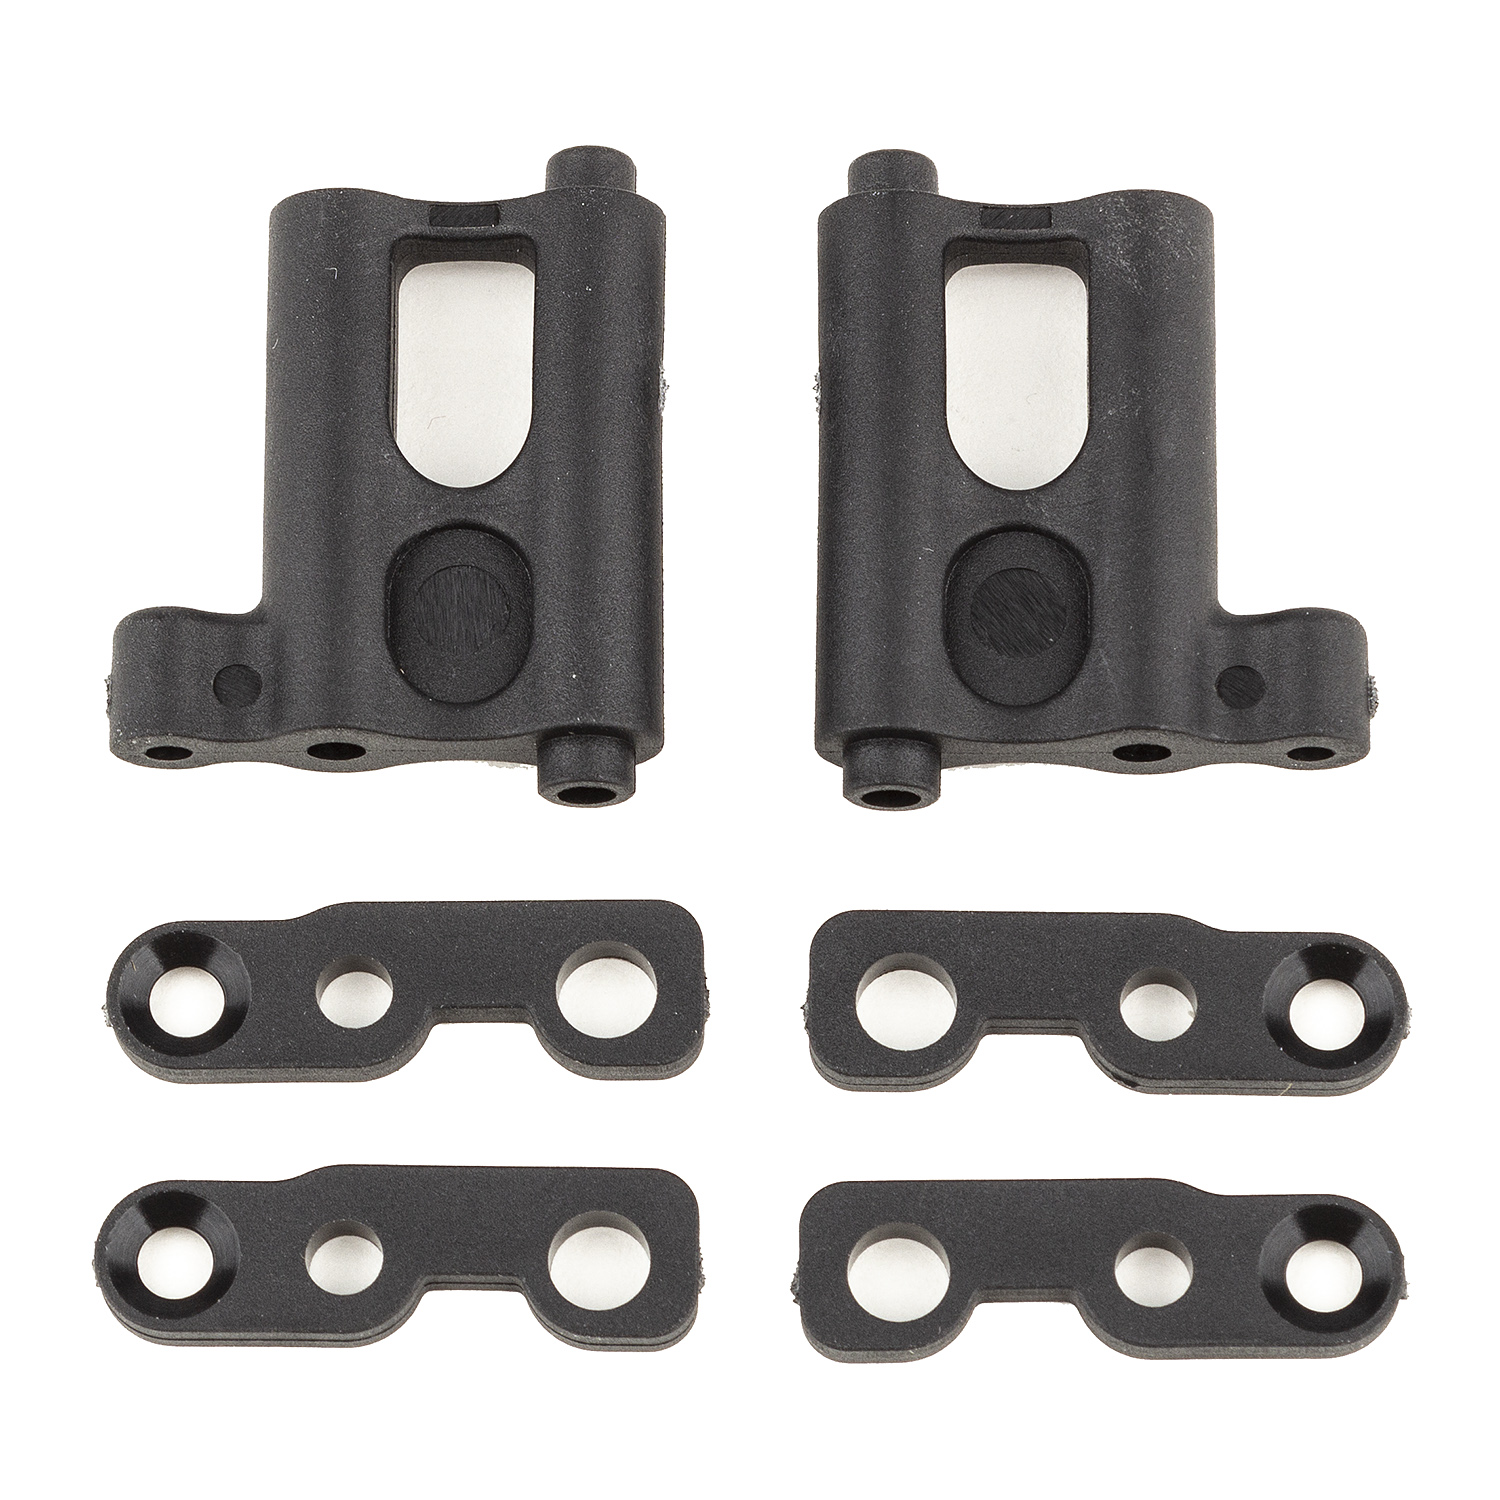 RC8B3.2 Radio Tray Posts and Spacers